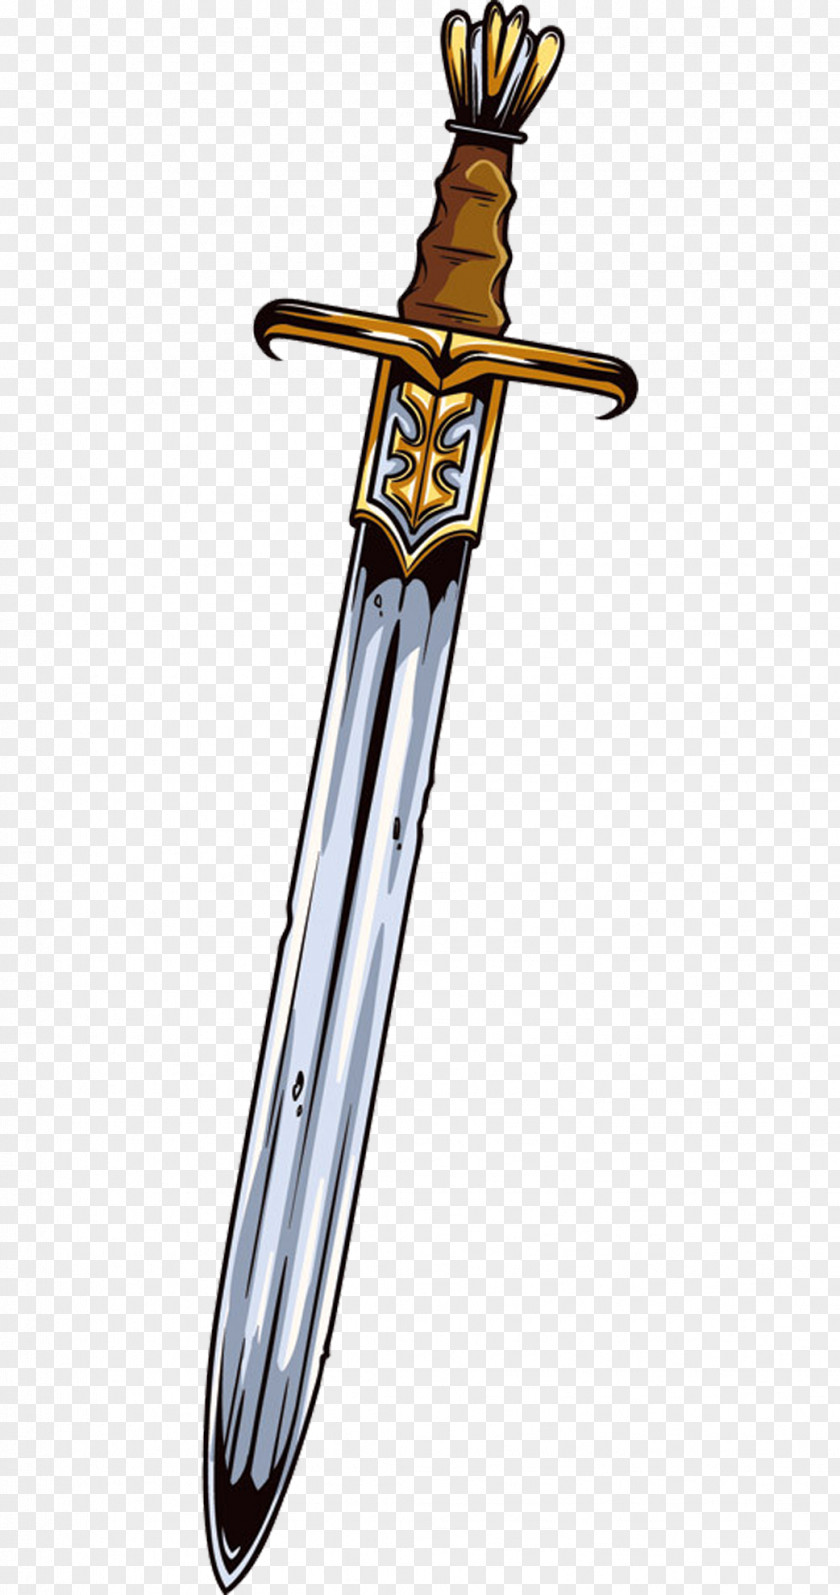 Yellow Pattern Sword Weapon Clip Art PNG